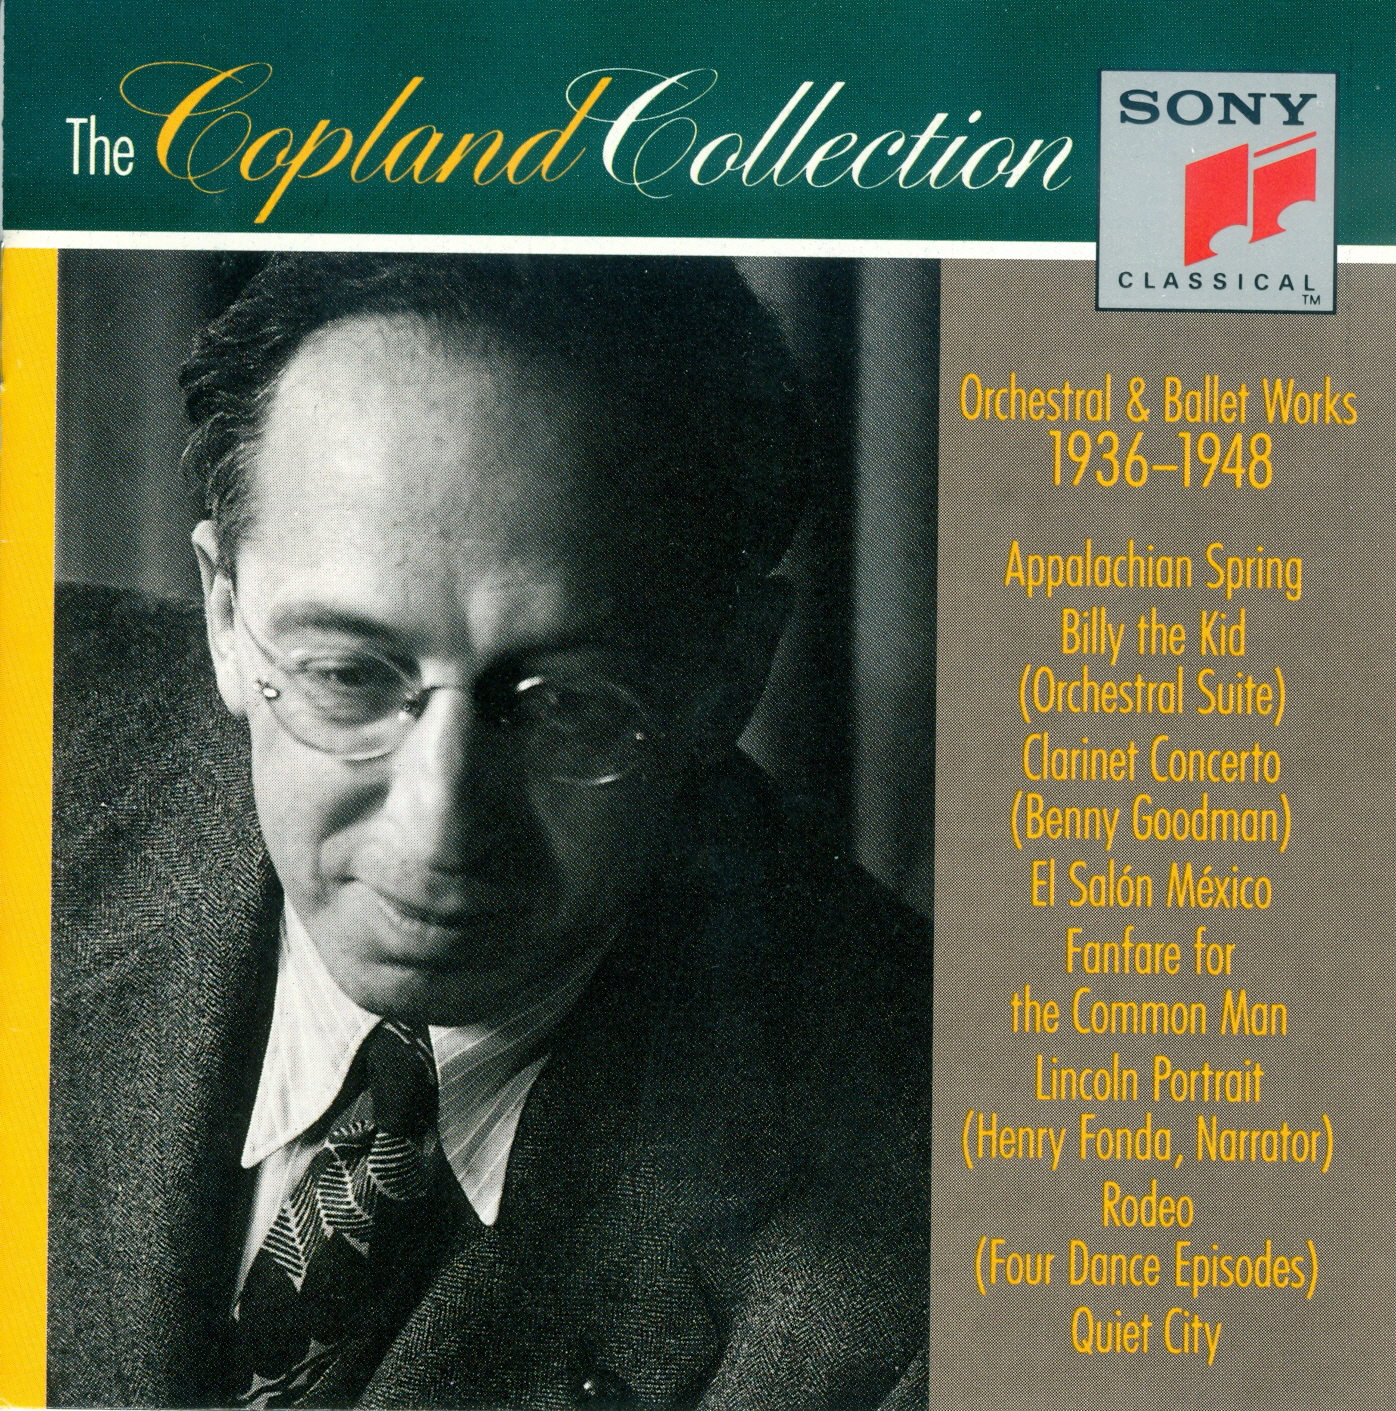 Aaron Copland - The Copland Collection 1936-1948 - Disc 3 missing track 1